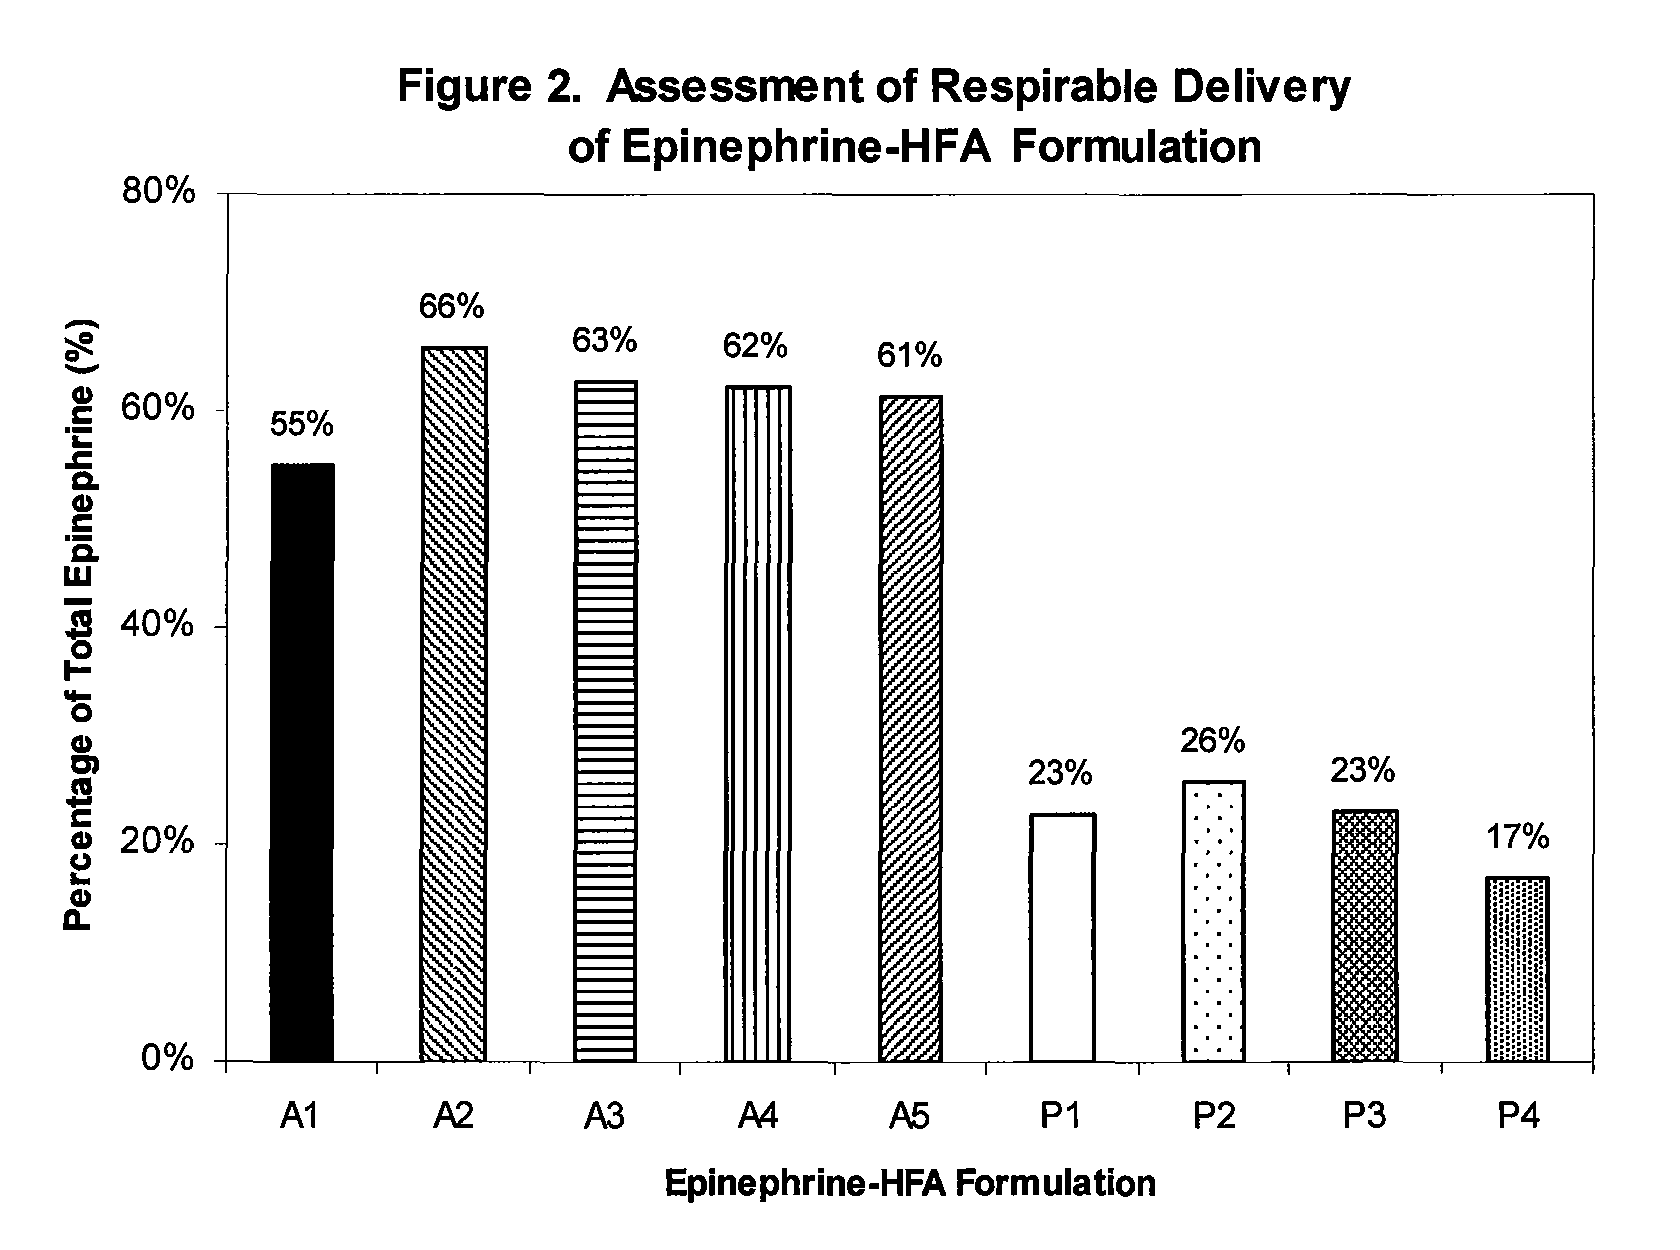 Stable epinephrine suspension formulation with high inhalation delivery efficiency